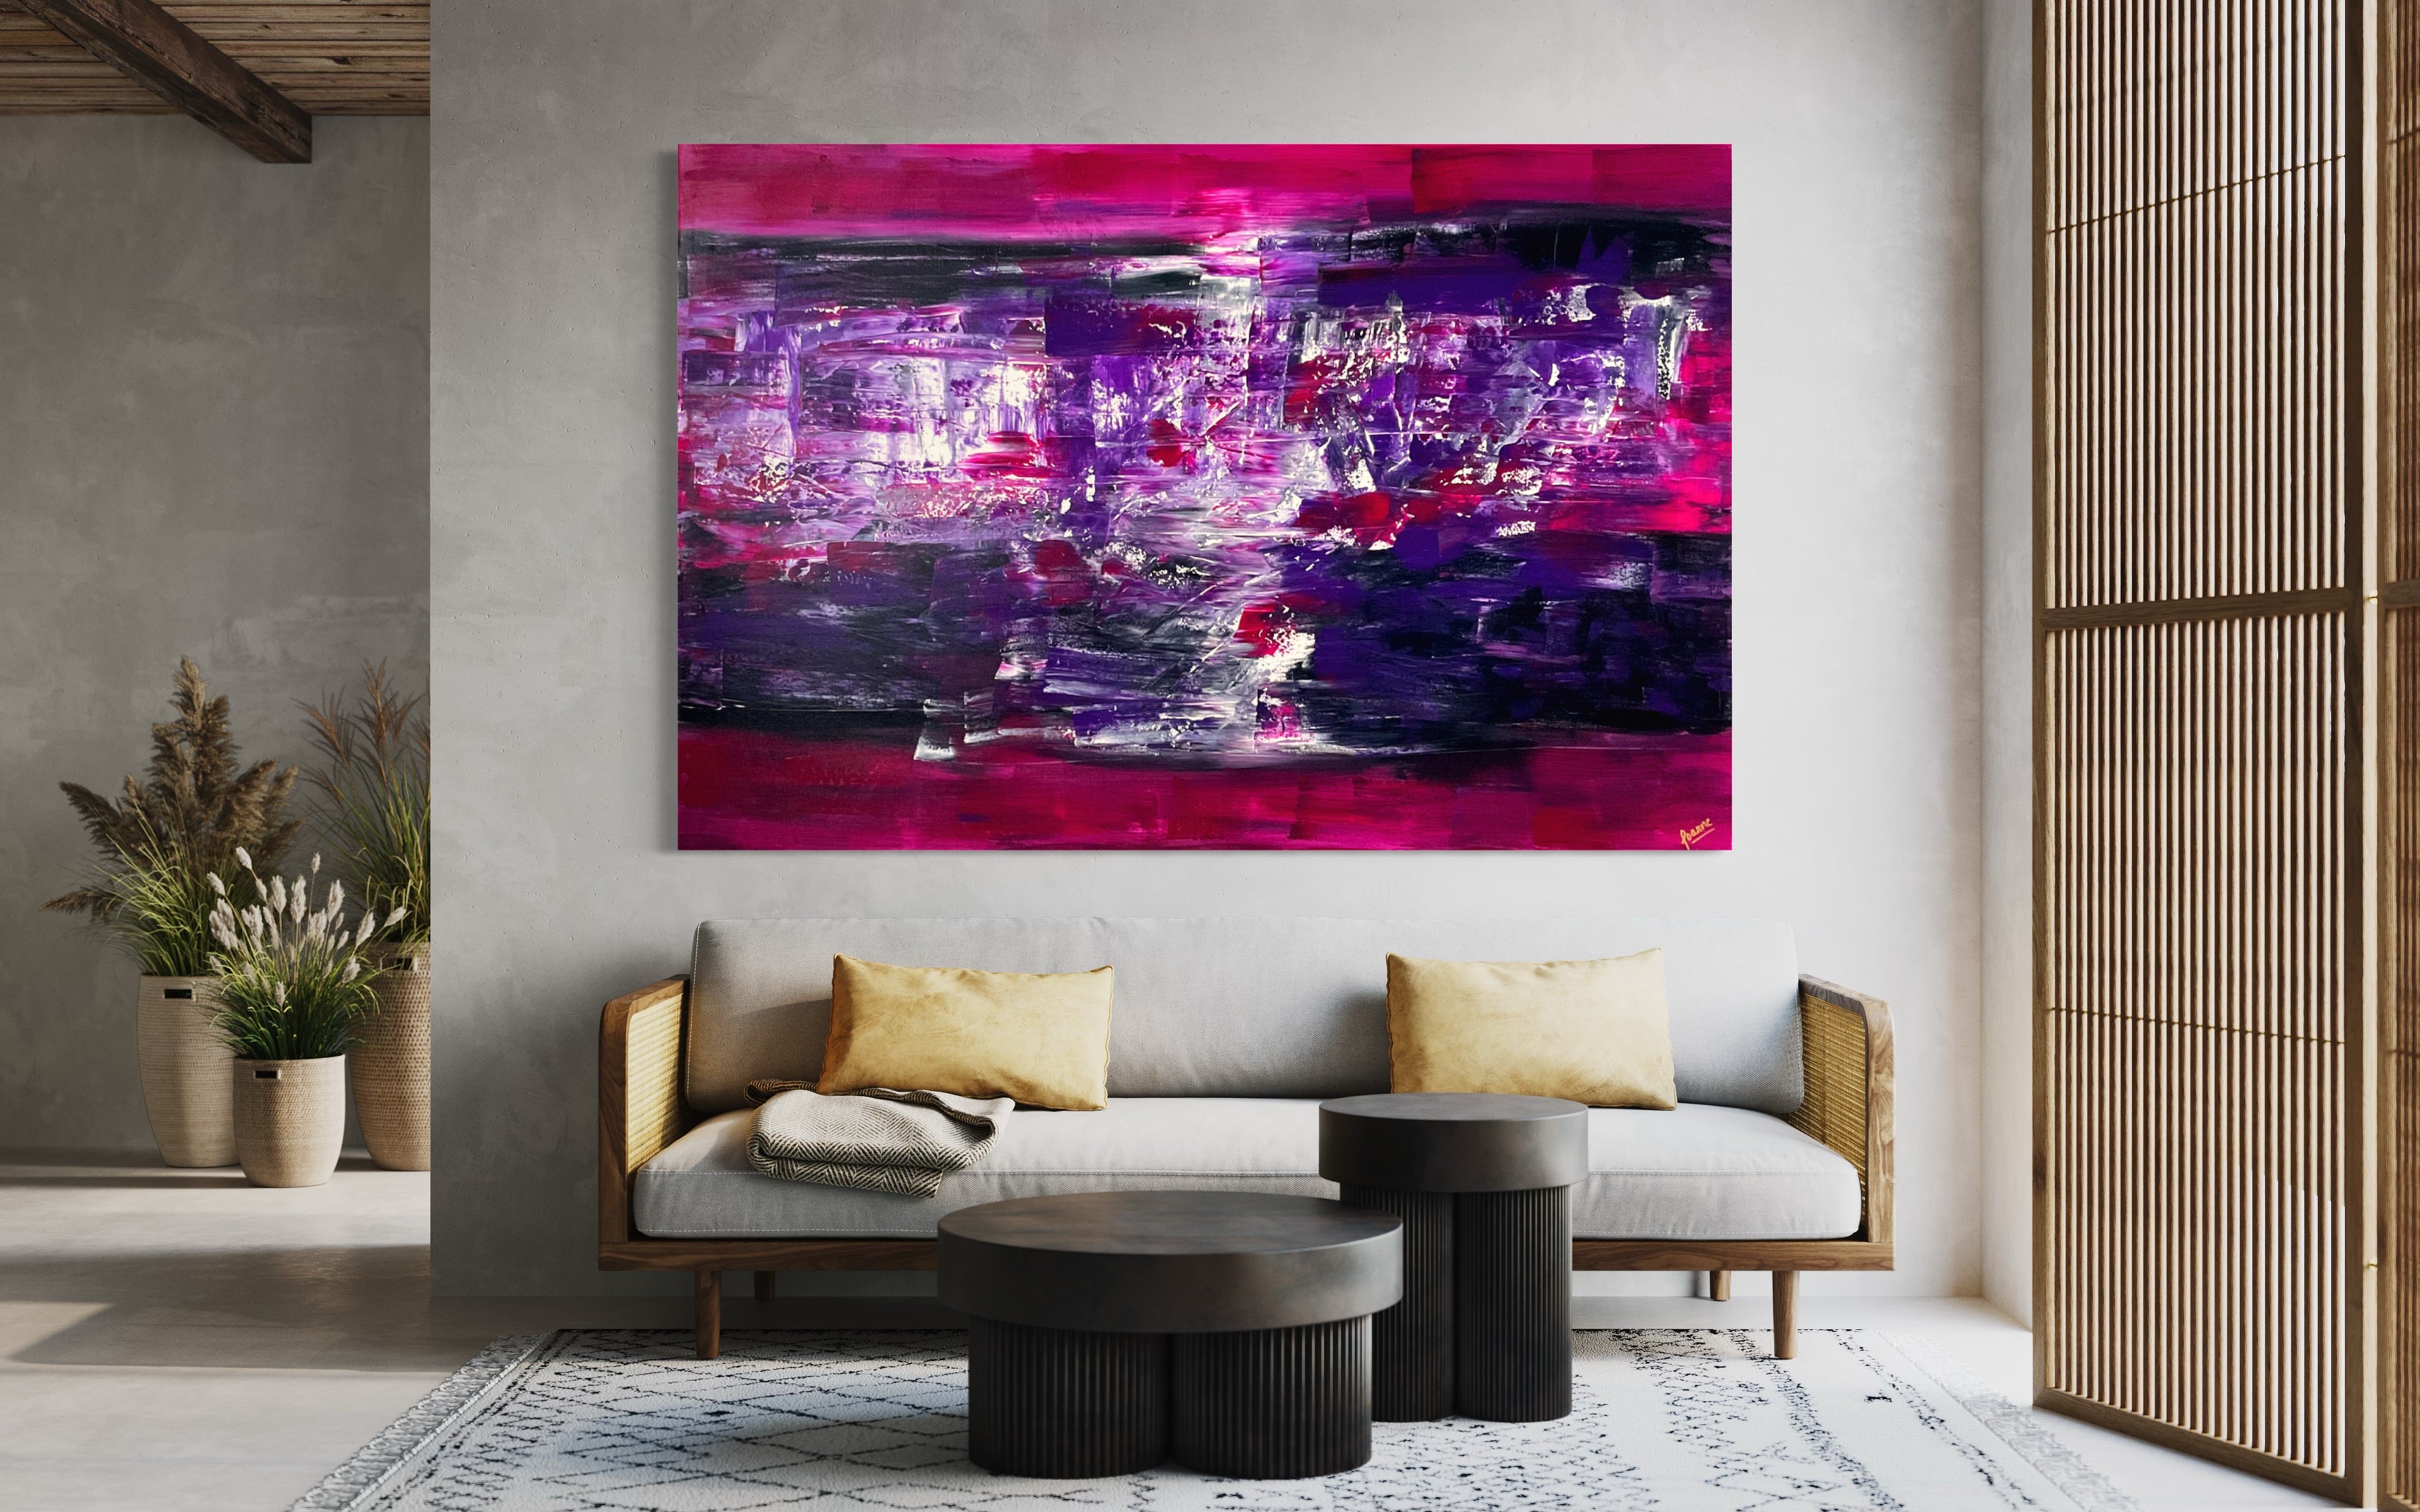 PINK 121 cm x 182 cm Textured Abstract Painting by Joanne Daniel